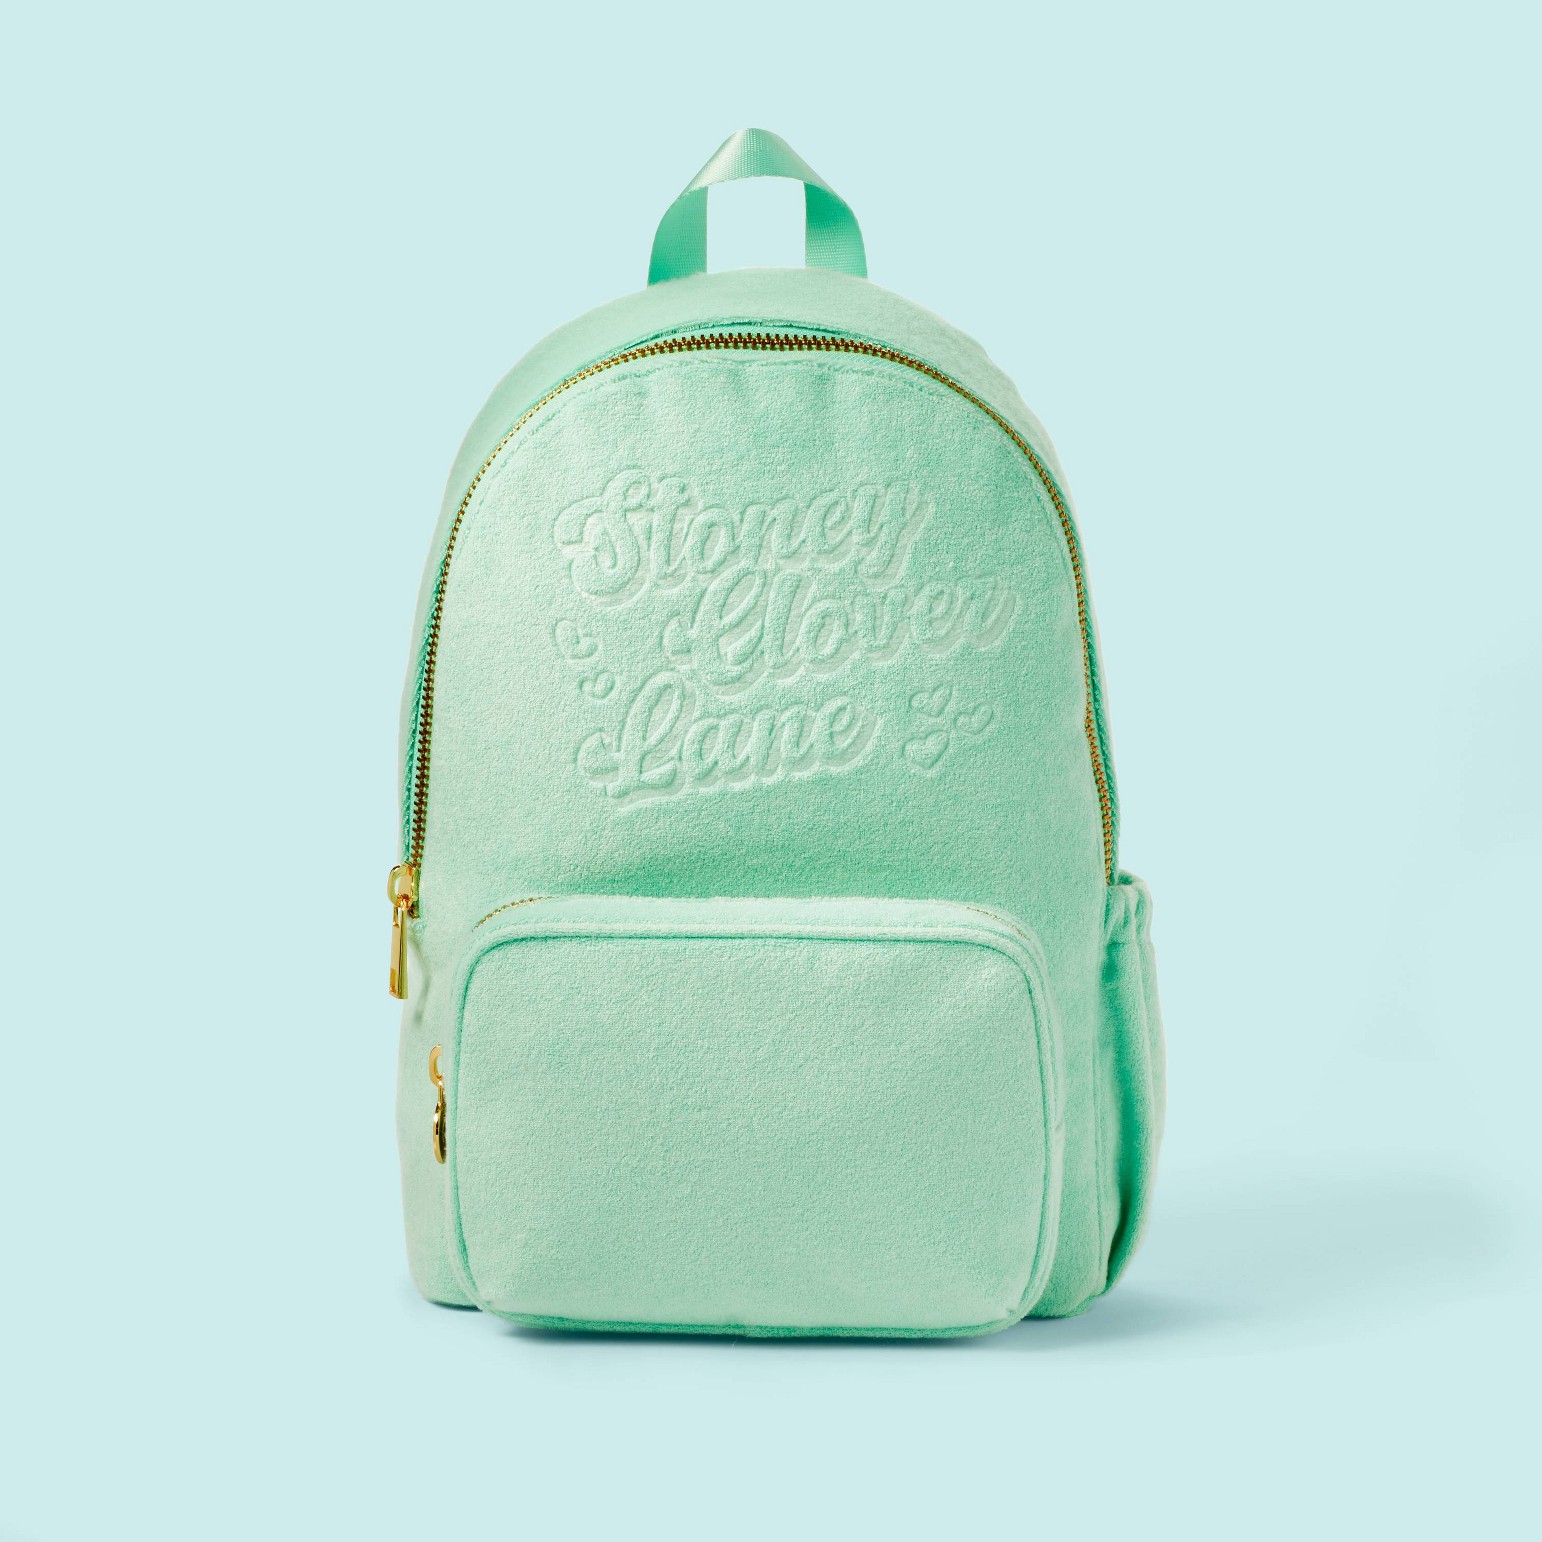 Terry Cloth Embossed Backpack - Stoney Clover Lane x Target Light Green